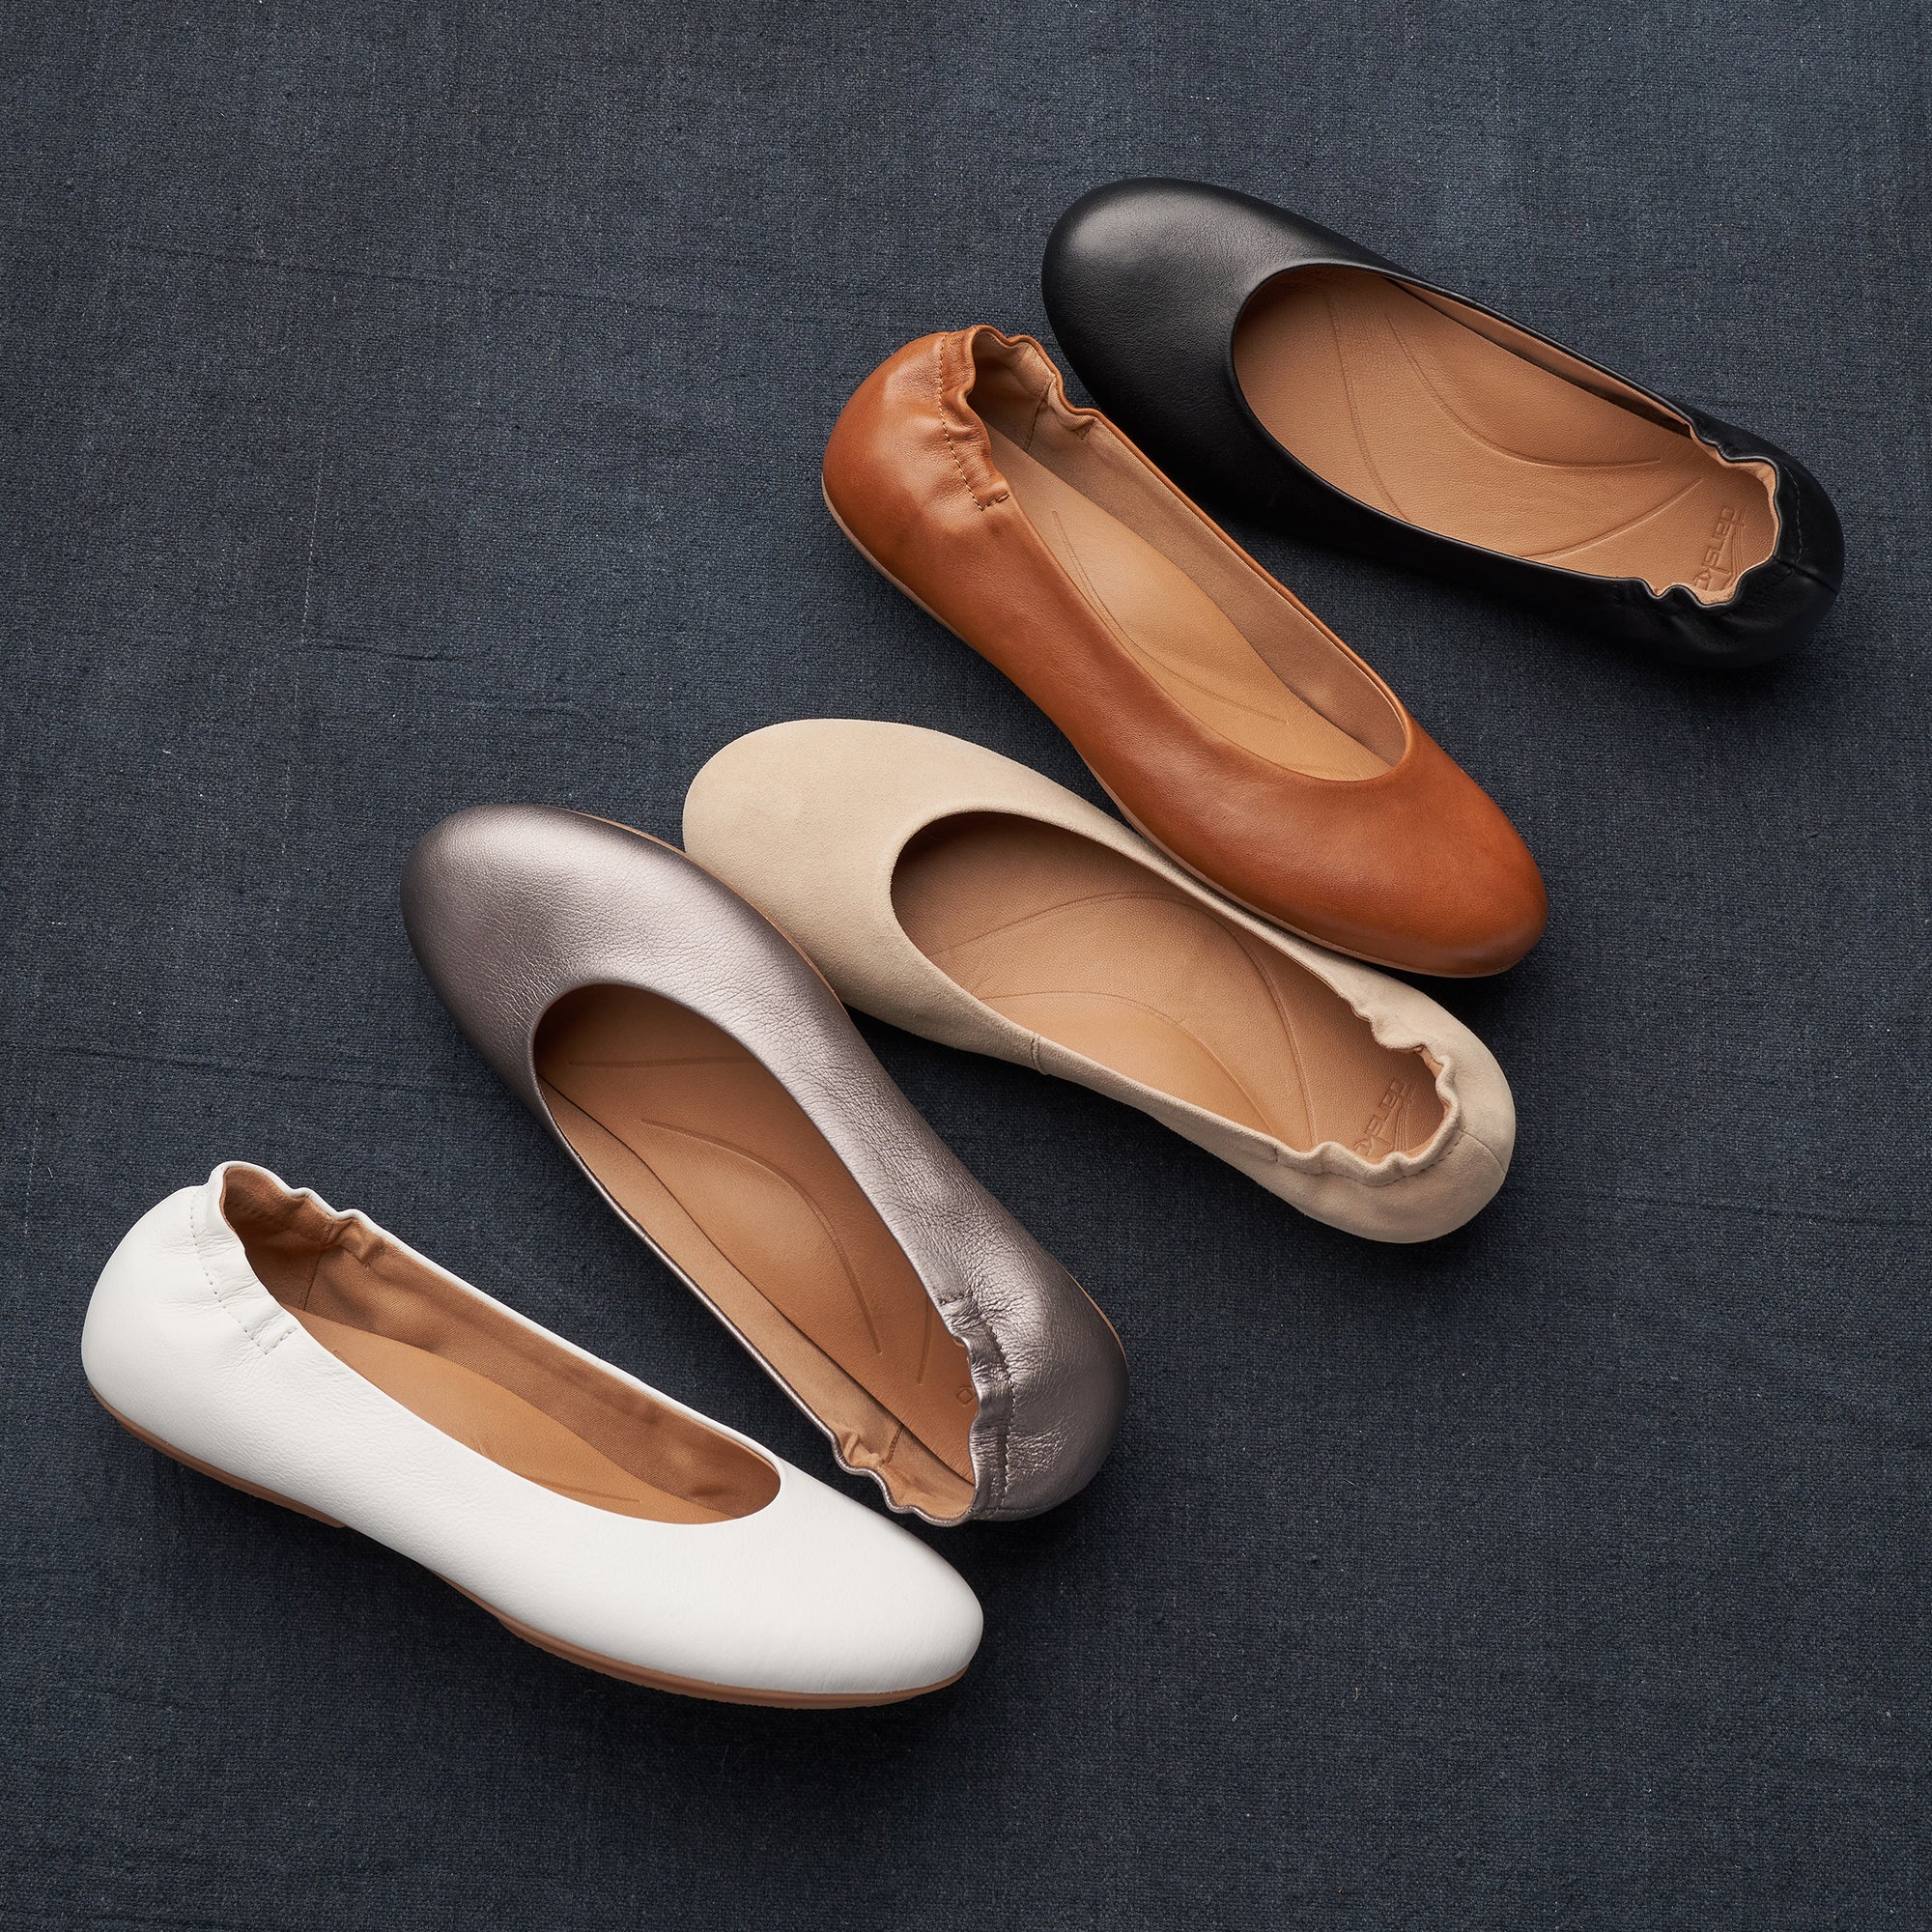 Five color options of a new ballerina flat with arch support and leather design featured.